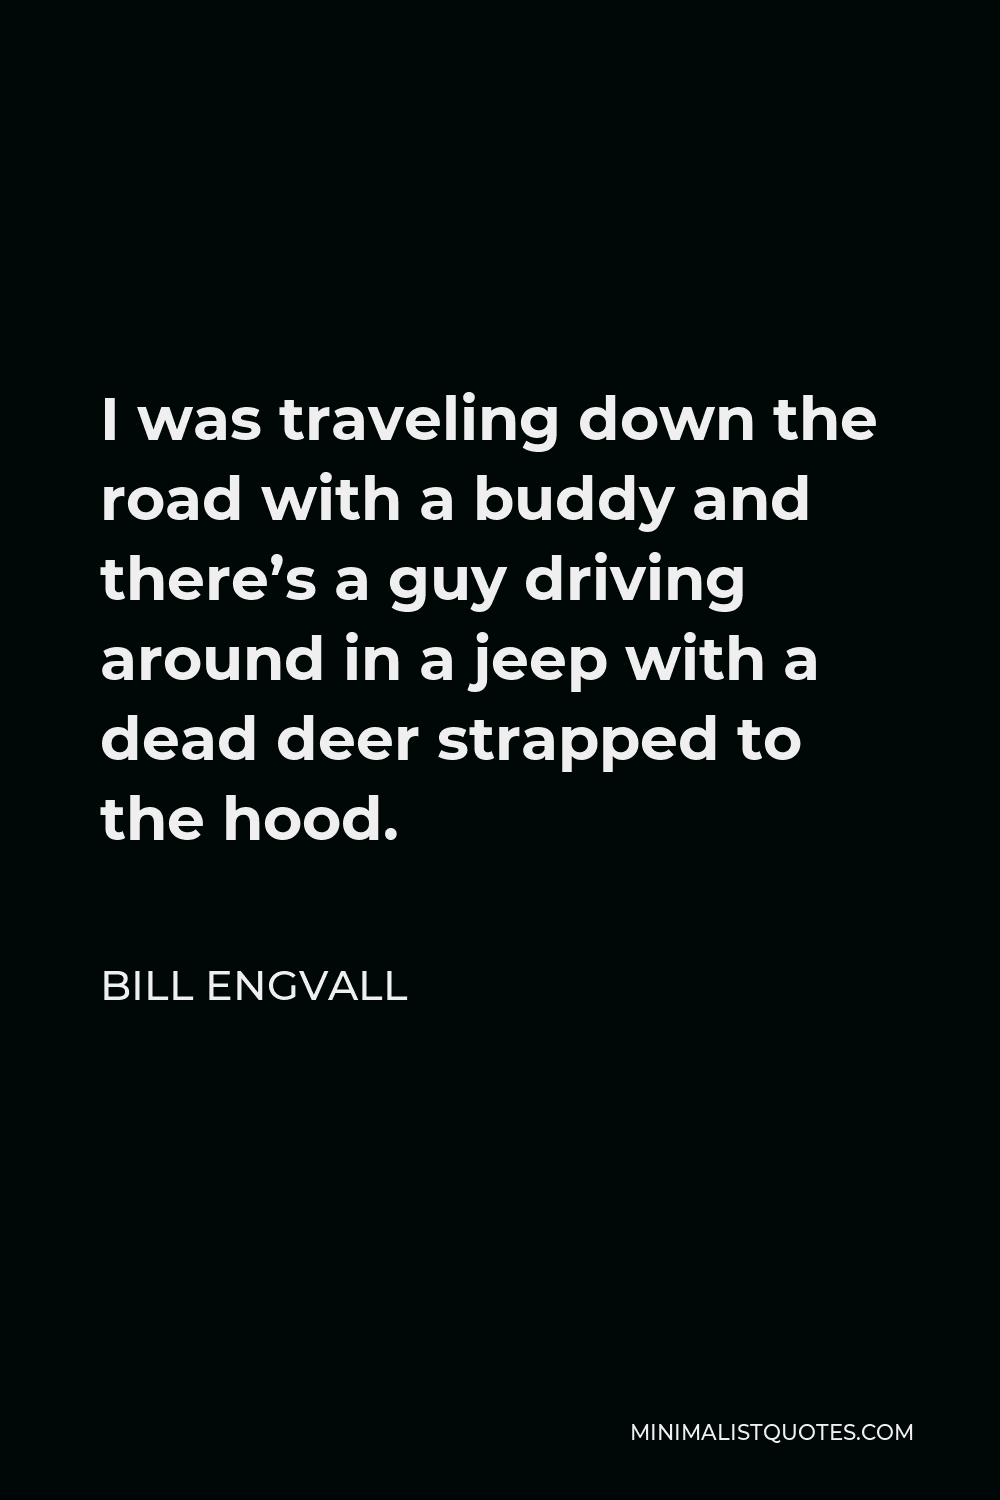 Bill Engvall Quote - I was traveling down the road with a buddy and there’s a guy driving around in a jeep with a dead deer strapped to the hood.